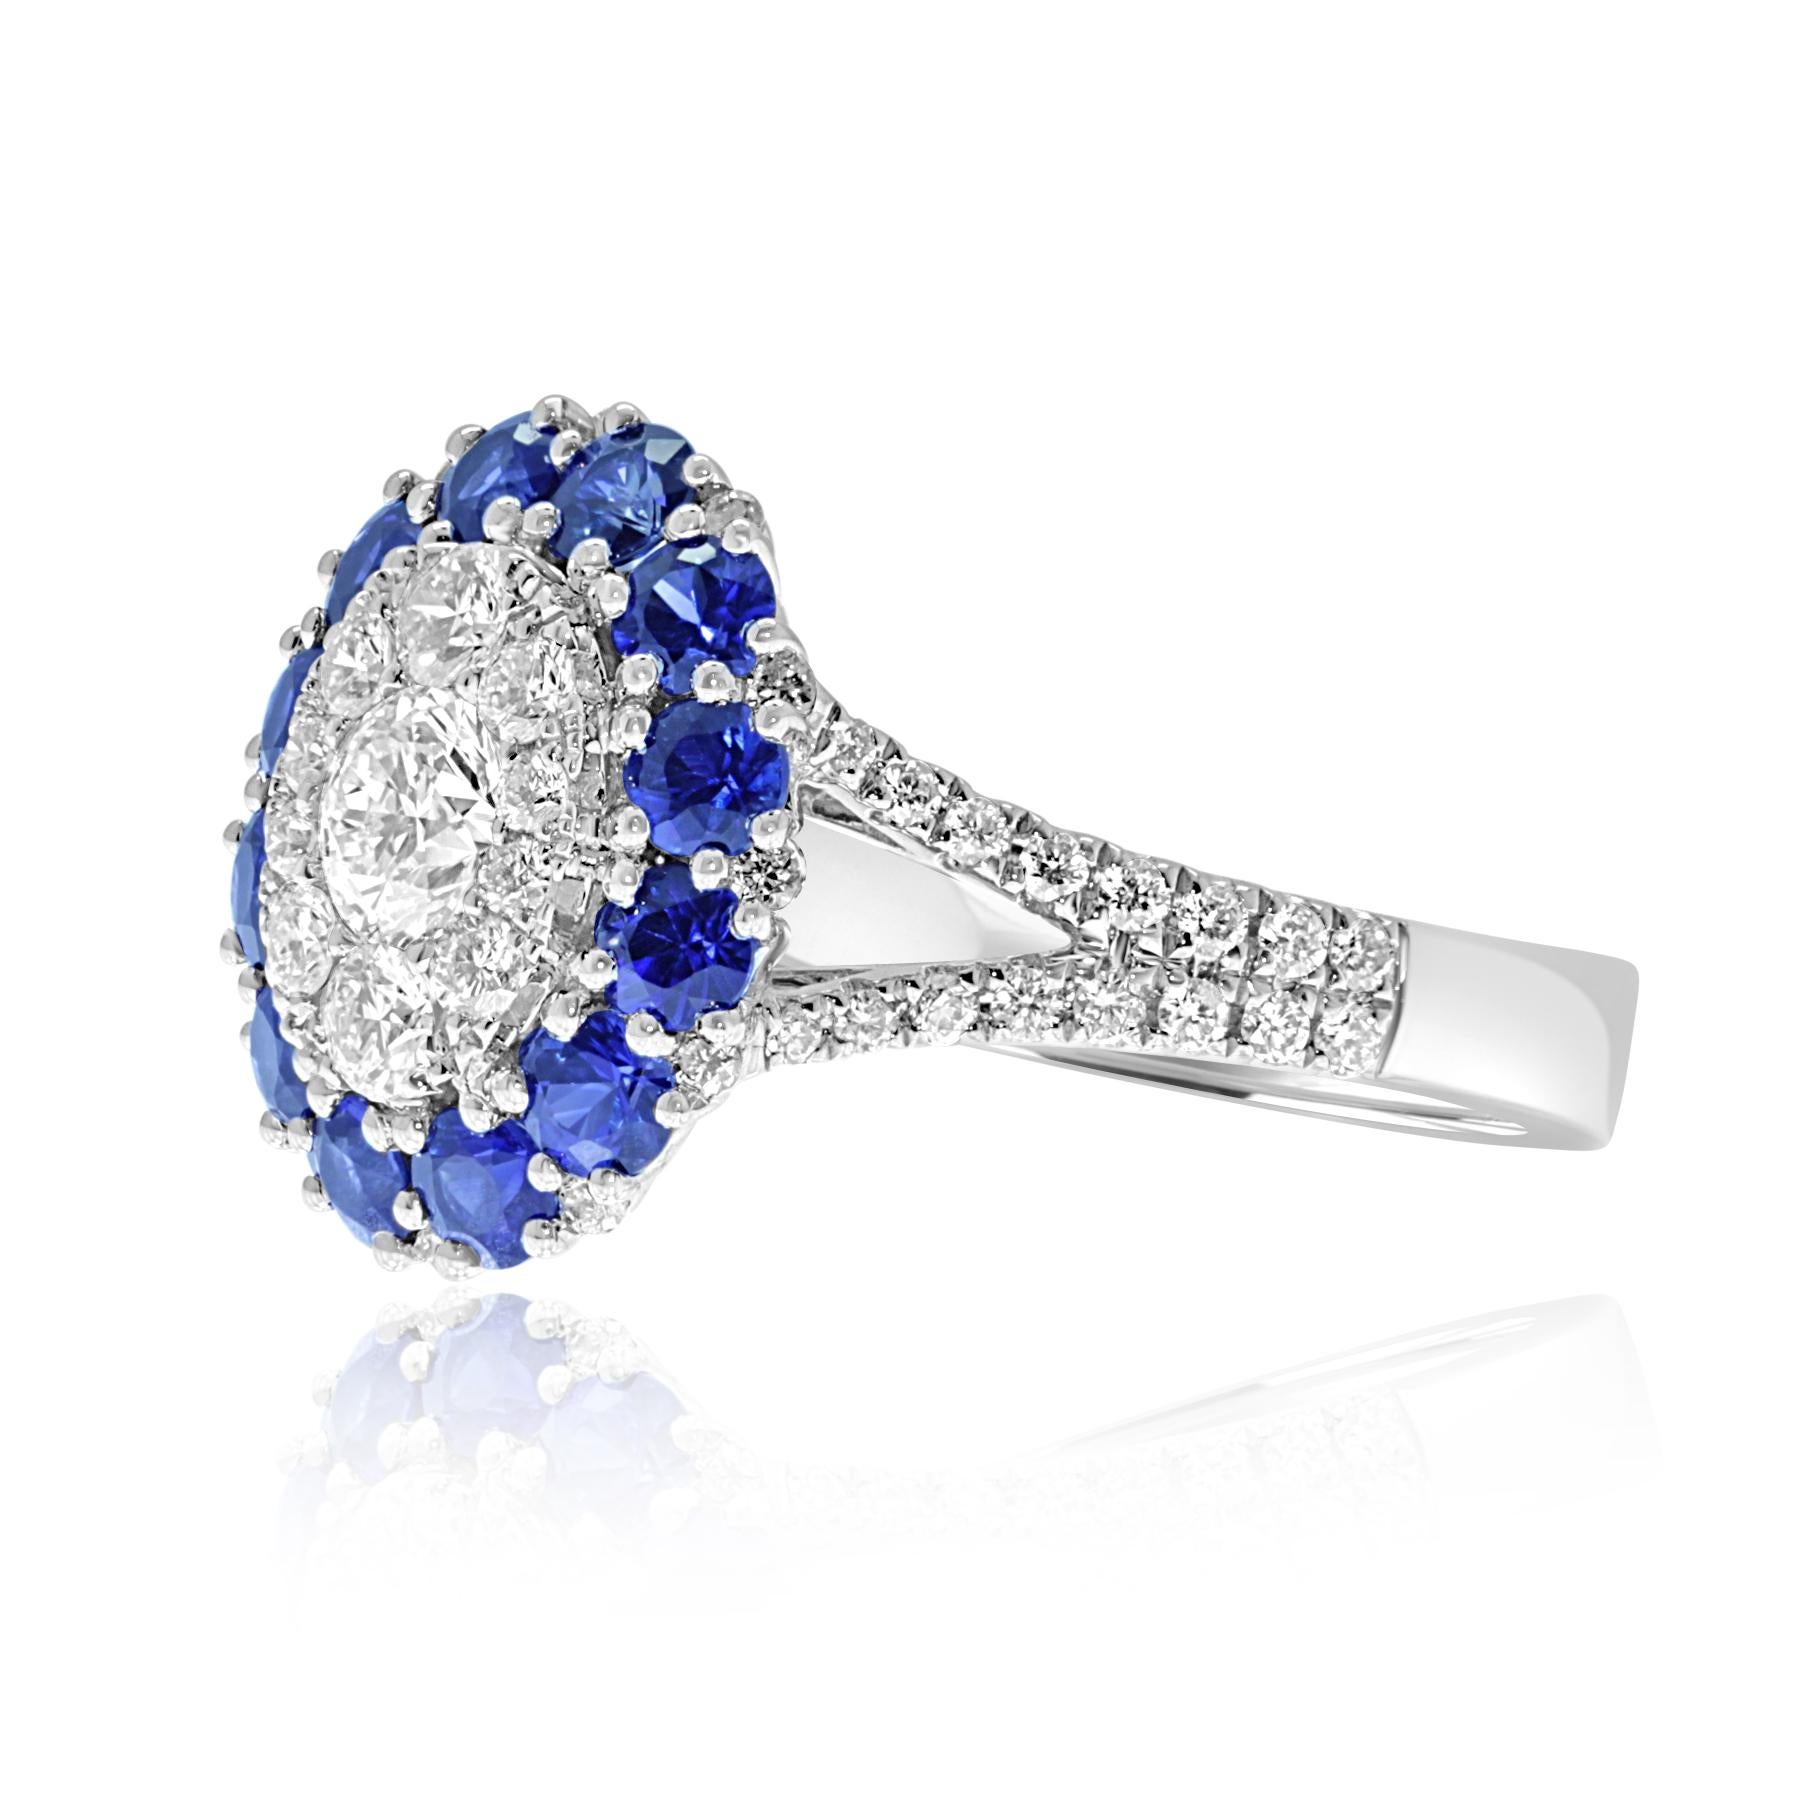 antique allure gorgeous blue sapphire and diamonds split band ring.
made of solid platinum, a very rare and valuable metal.
weighs 8.6gr, diamonds weight is 0.85ct in total, blue sapphires weigh 1.24ct in total.
ring size is 53 and can be adjusted